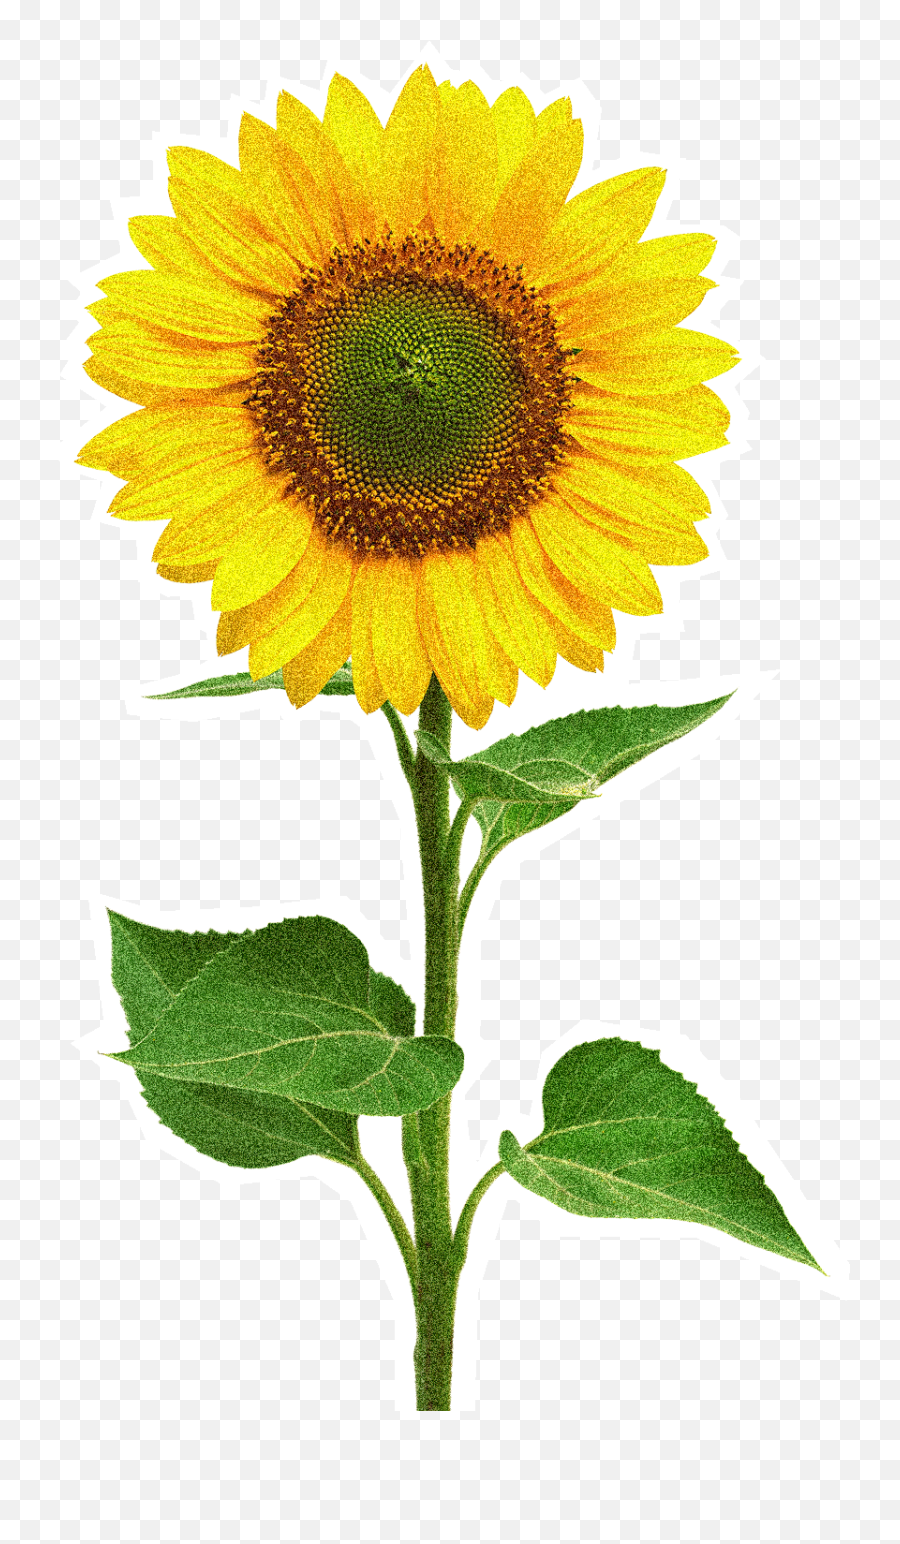 Single Sunflower Images Hd Clipart - Full Size Clipart Emoji,Sunflower Corner Border Clipart